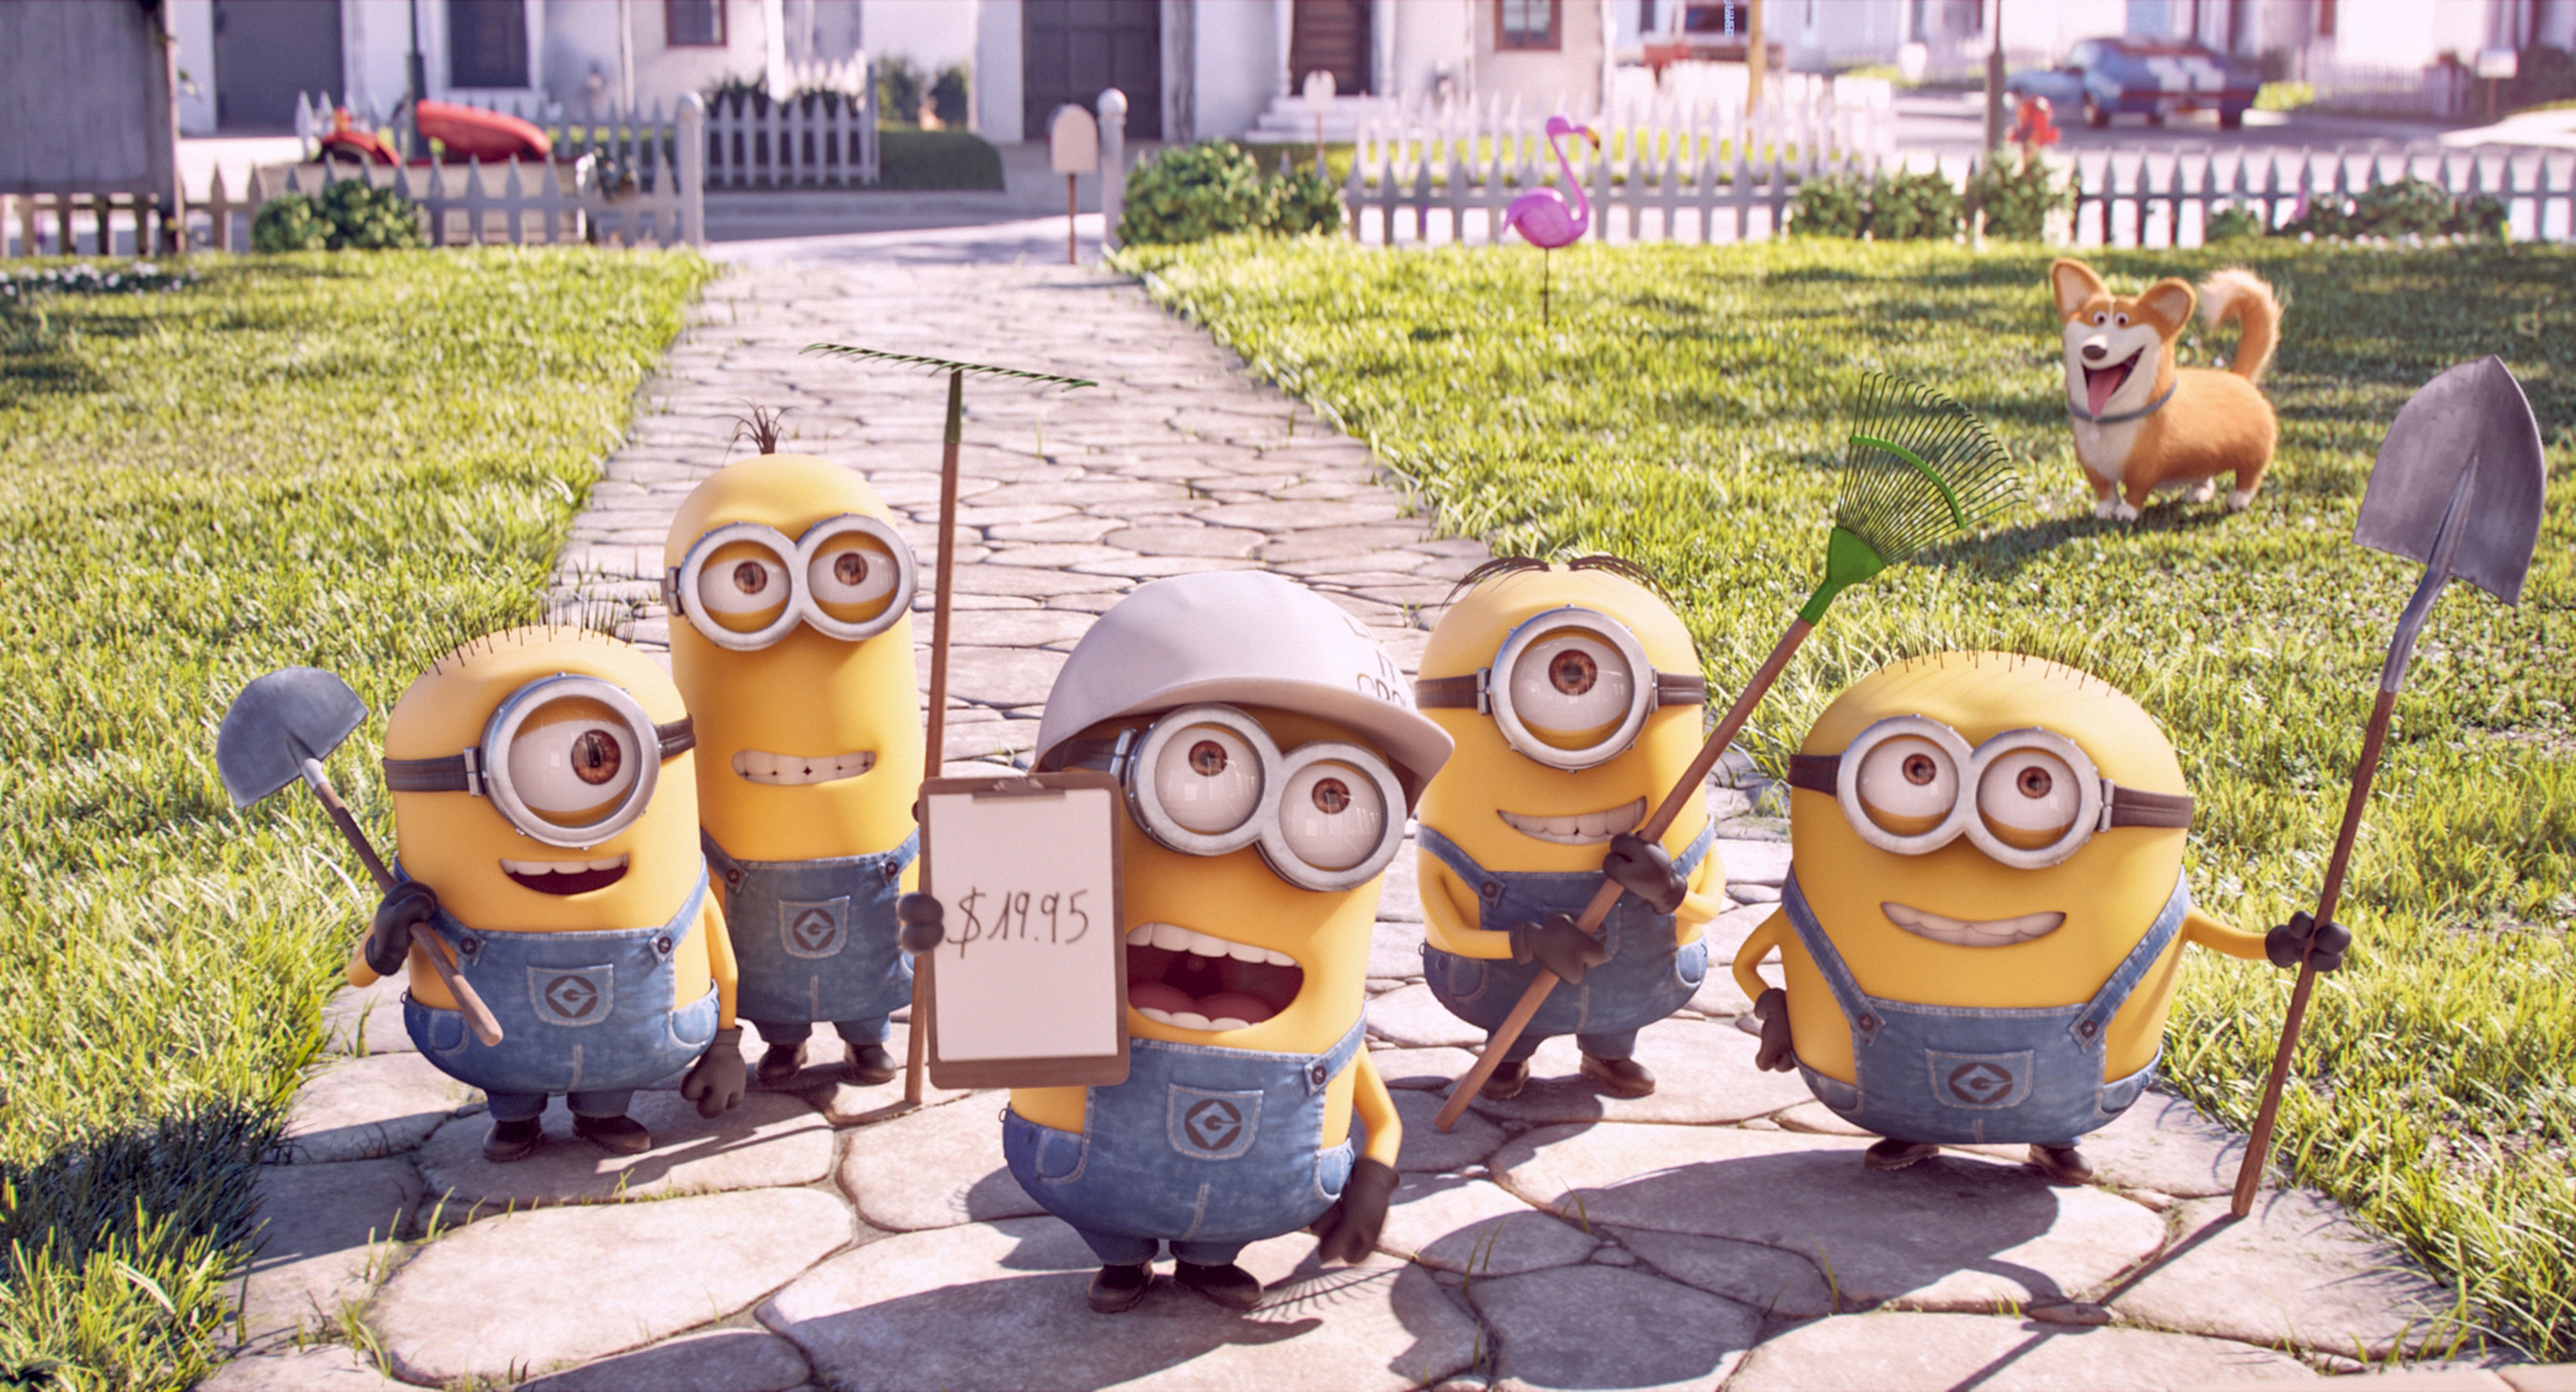 Mower Minions, a never-before-seen in-theater short film starring the Minions, debuts with Illumination Entertainment and Universal Pictures' The Secret Life of Pets, in theaters on July 8, 2016. Credit: Illumination Entertainment and Universal Pictures